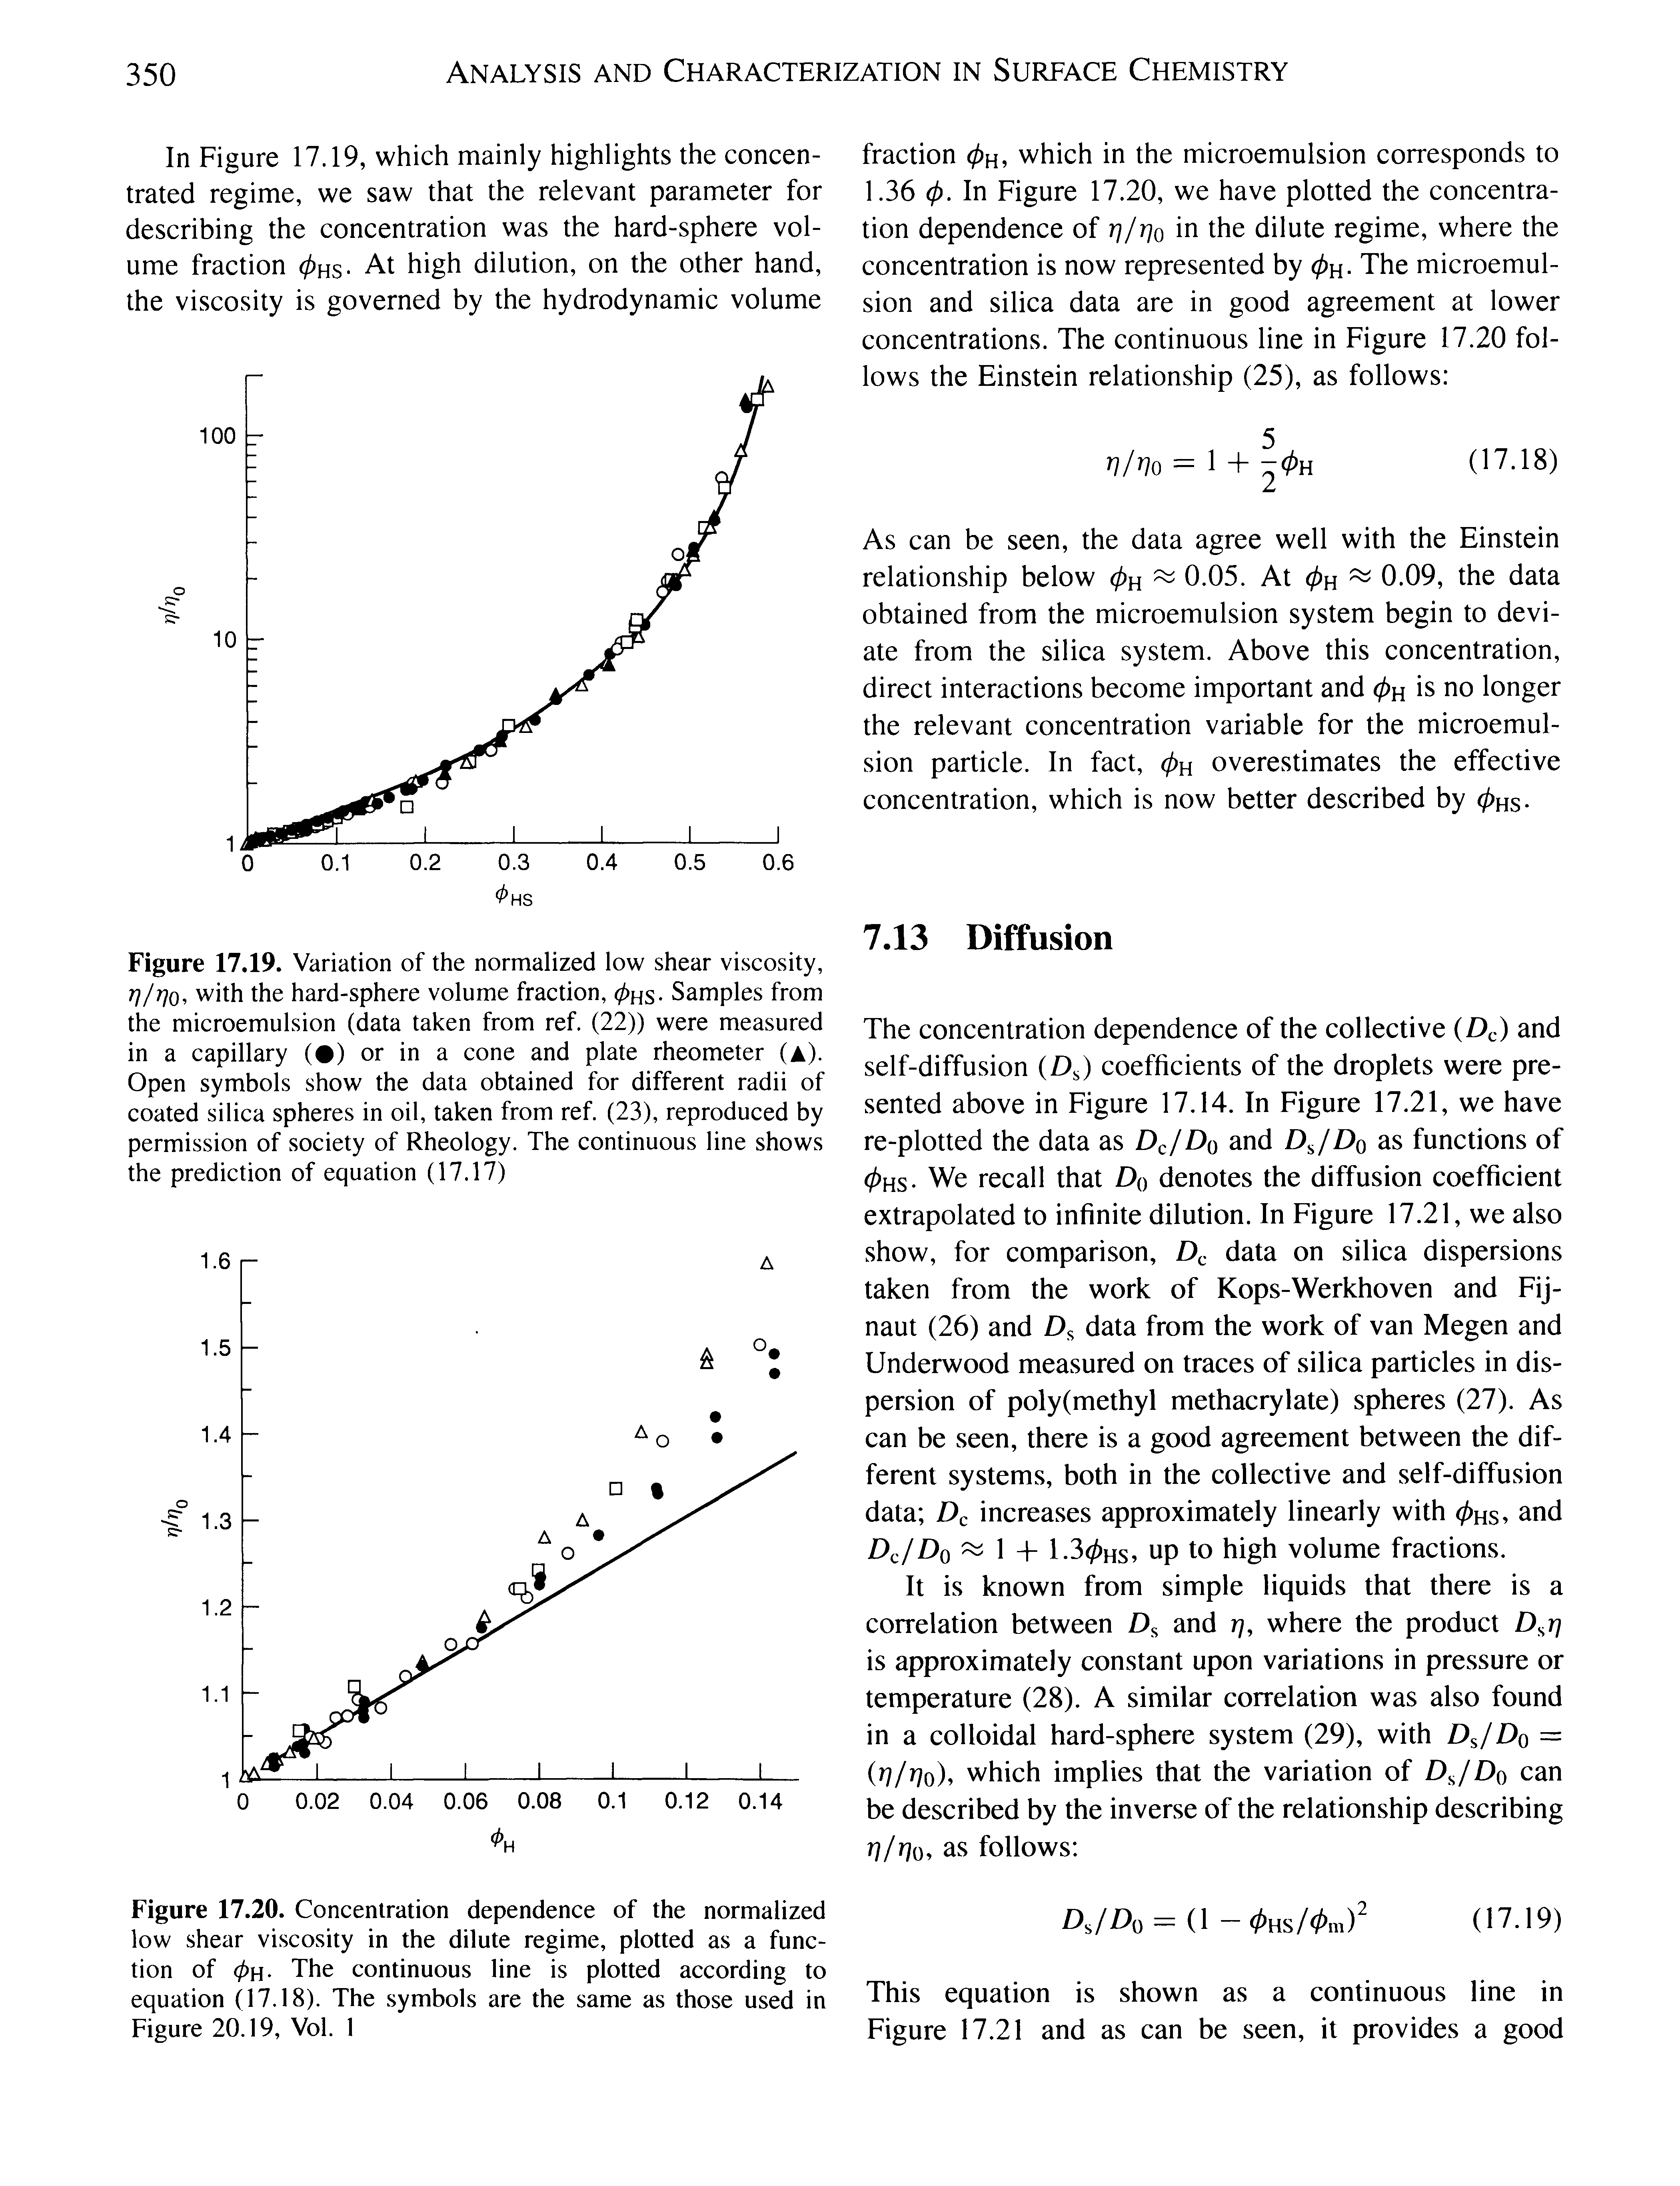 Figure 17.19. Variation of the normalized low shear viscosity, with the hard-sphere volume fraction, 0hs- Samples from the microemulsion (data taken from ref. (22)) were measured in a capillary ( ) or in a cone and plate rheometer (A). Open symbols show the data obtained for different radii of coated silica spheres in oil, taken from ref. (23), reproduced by permission of society of Rheology. The continuous line shows the prediction of equation (17.17)...